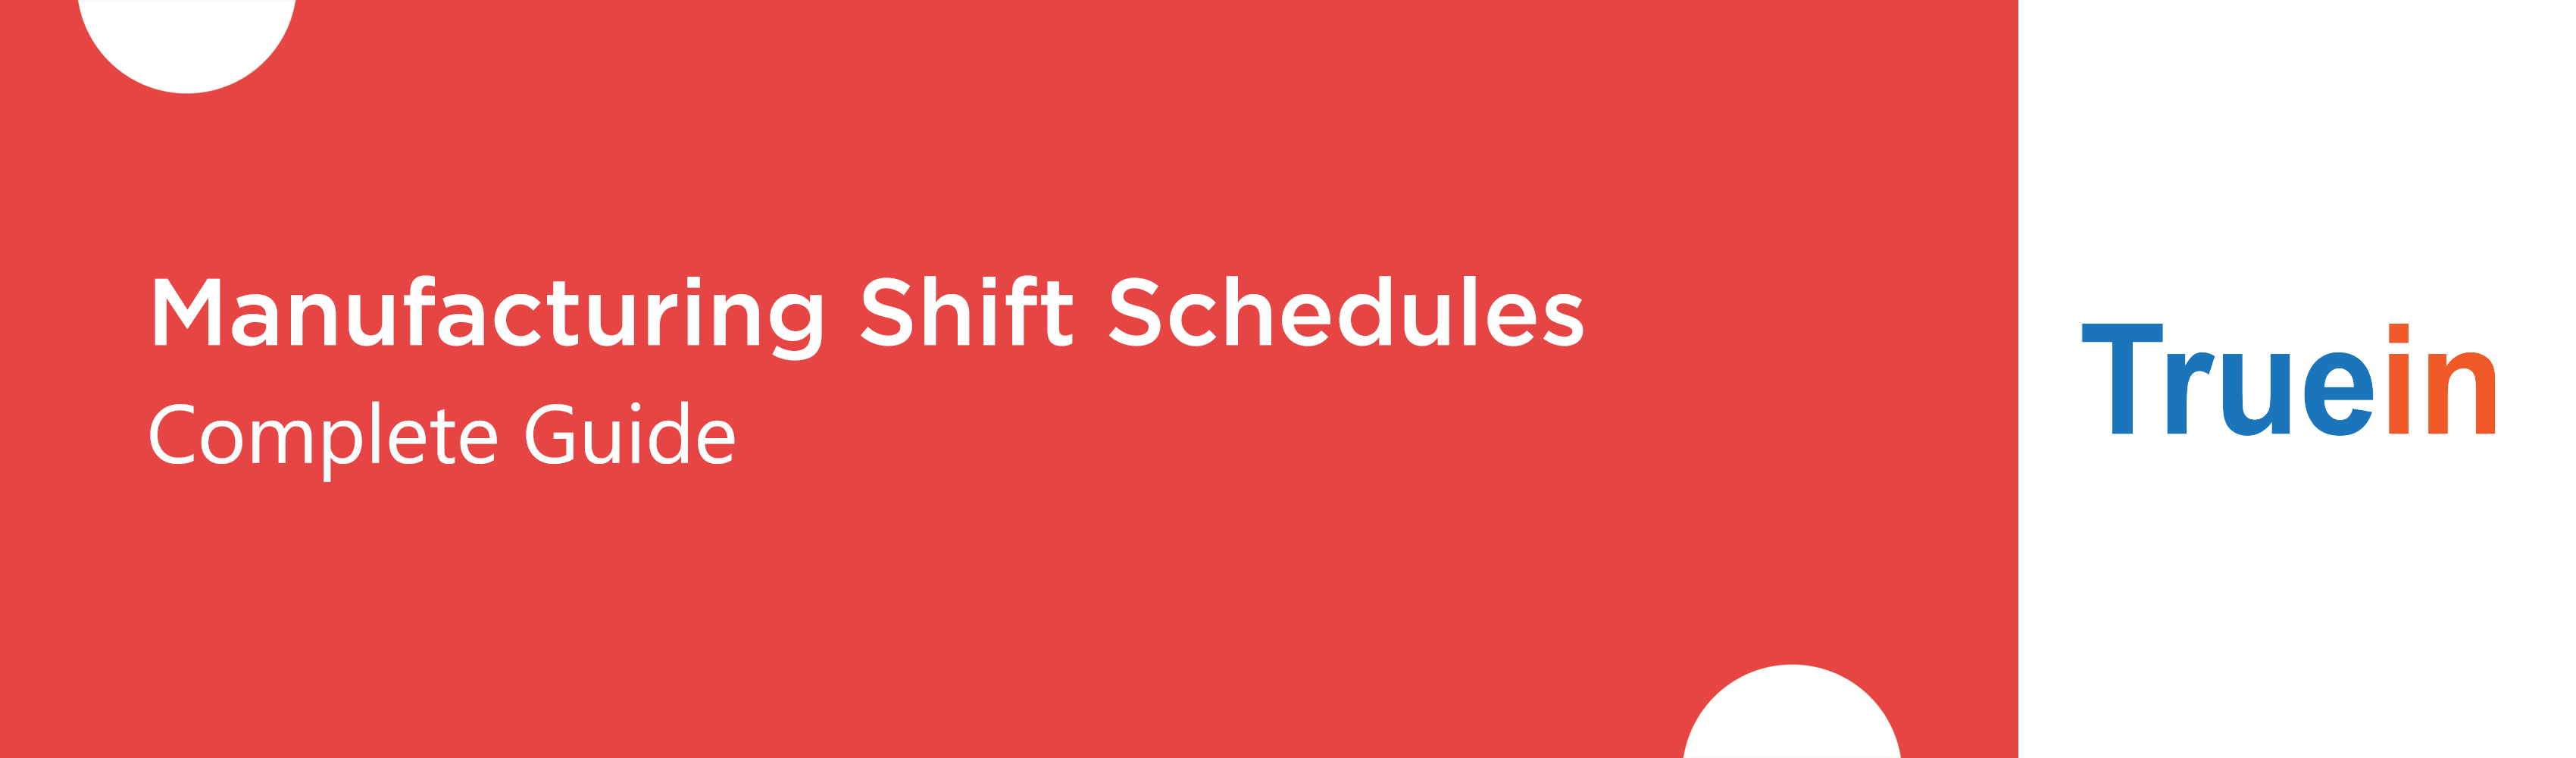 Manufacturing Shift Schedules: A Complete Guide